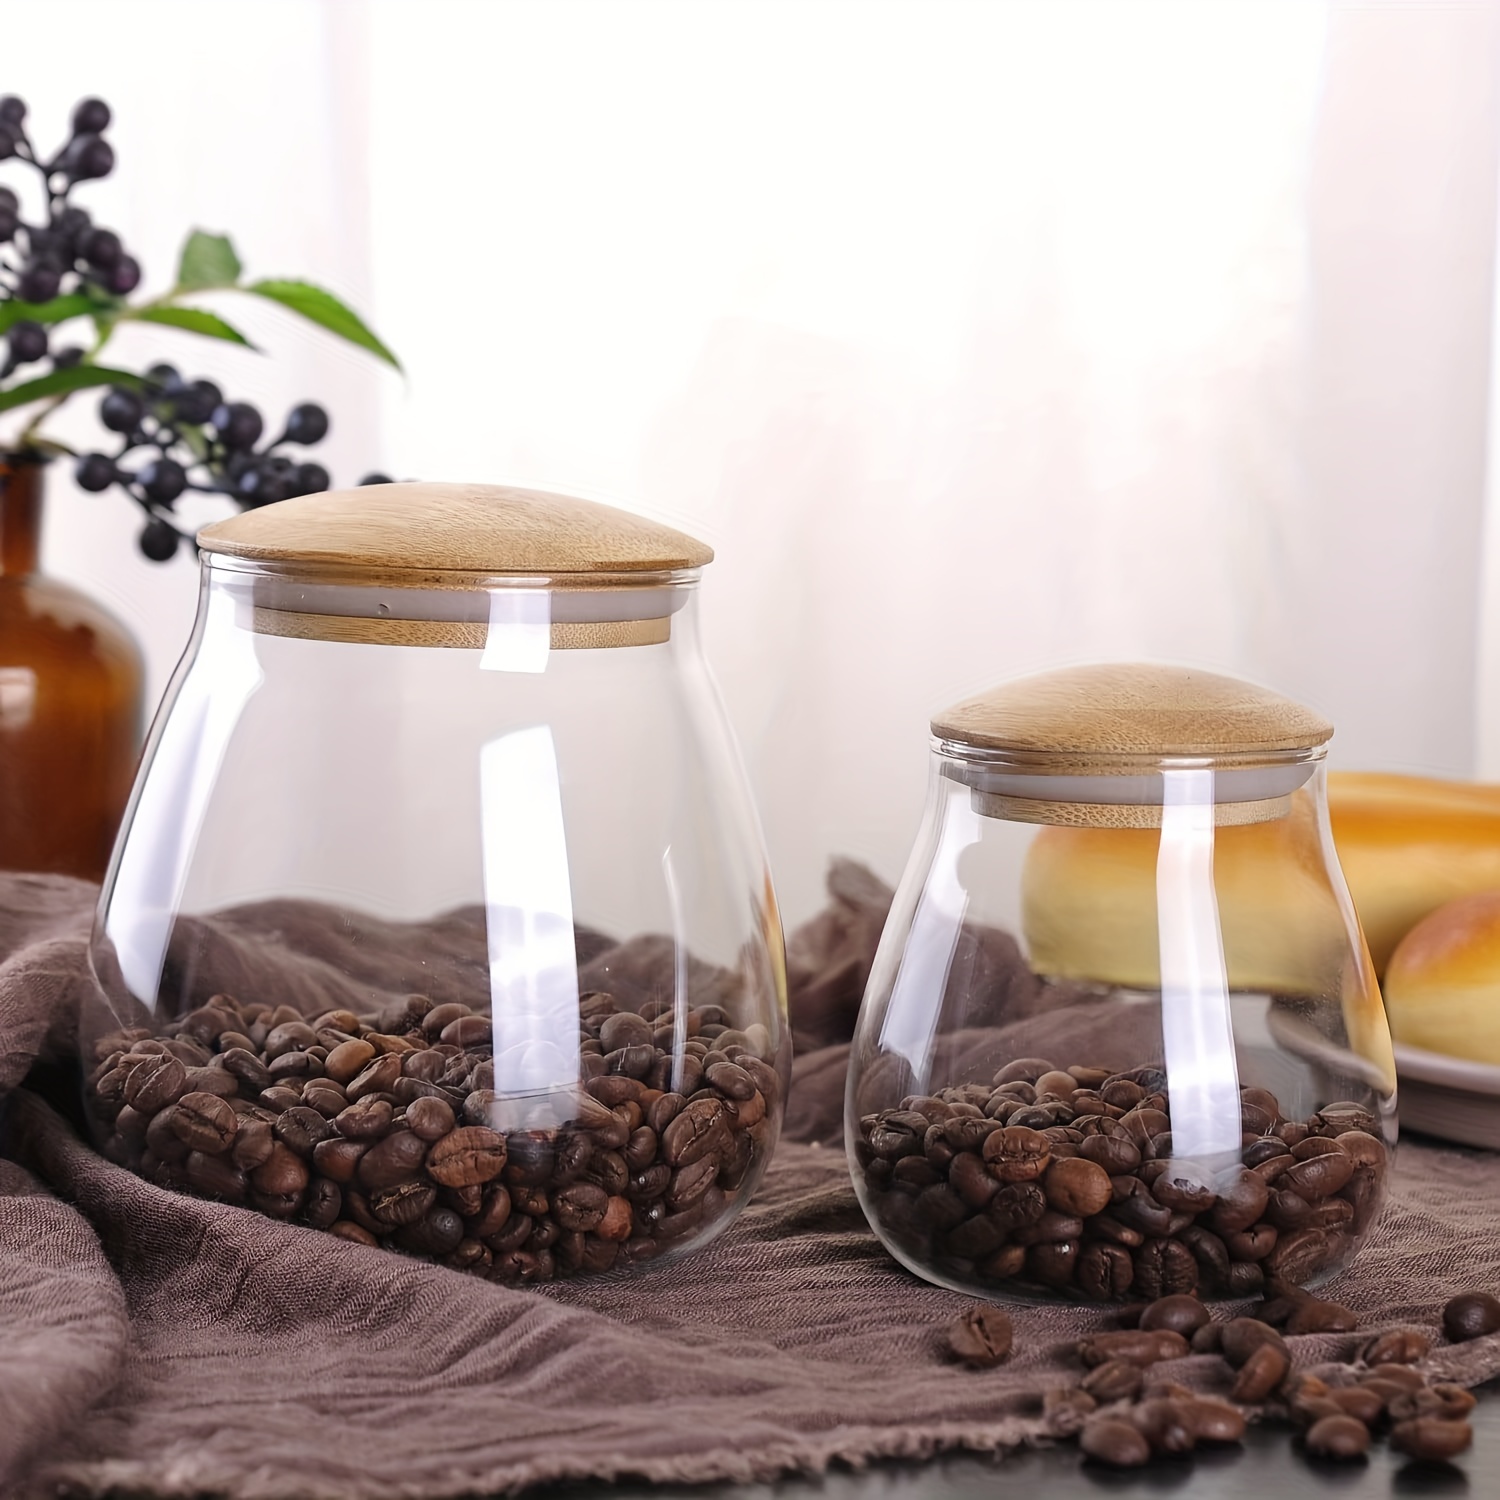 Glass Jar With Bamboo Lid Food Candy Storage Bottles Tea Container Cup -  Bienvenue